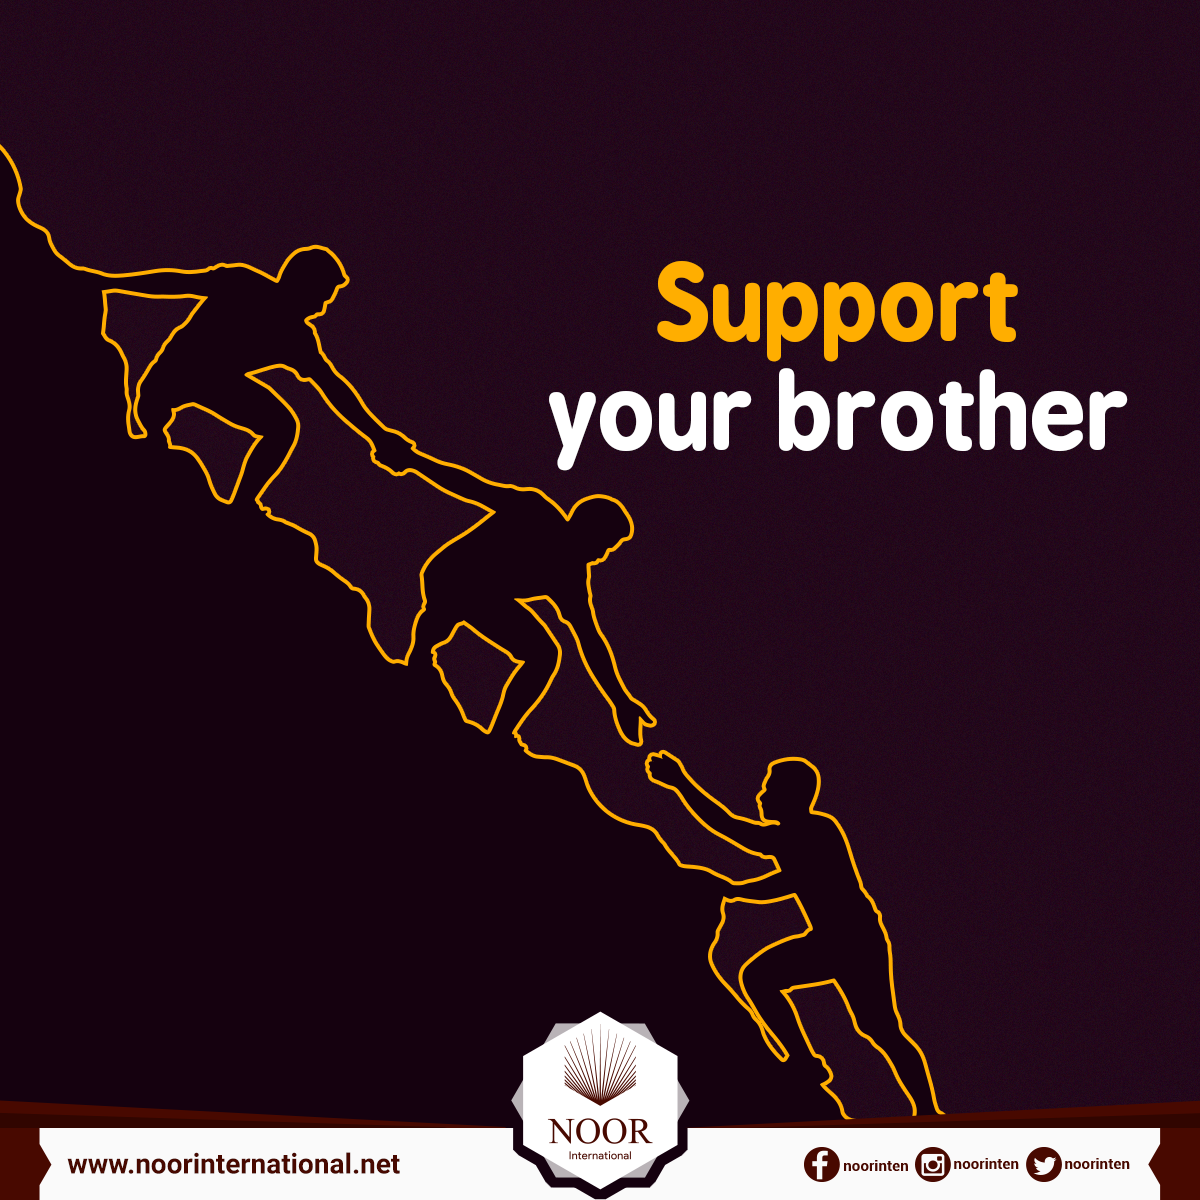 Support your brother